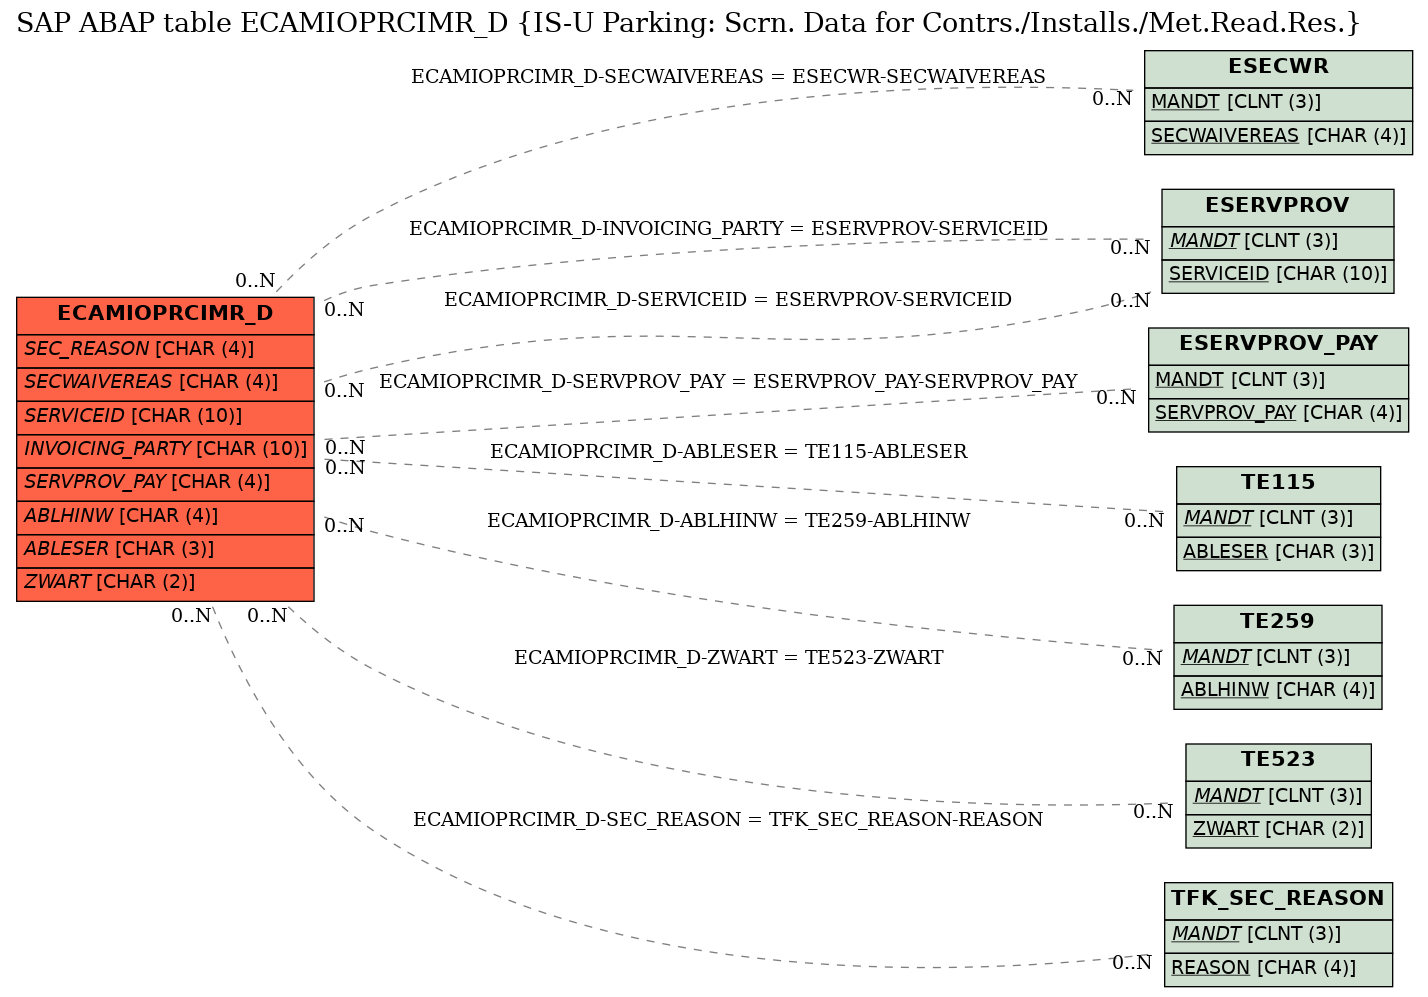 E-R Diagram for table ECAMIOPRCIMR_D (IS-U Parking: Scrn. Data for Contrs./Installs./Met.Read.Res.)